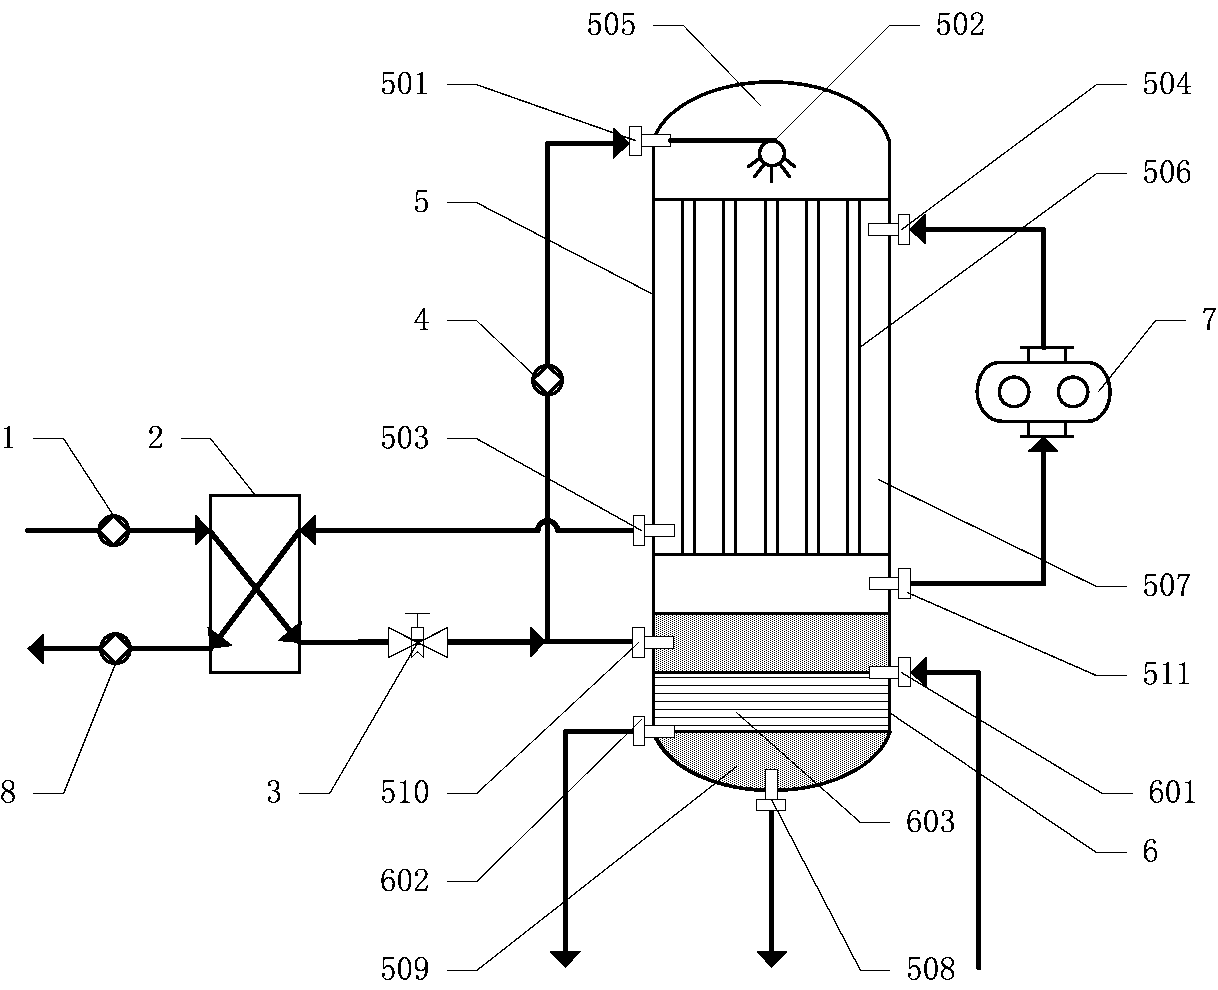 MVR (Mechanical Vapor Recompression) system with external energy compensation